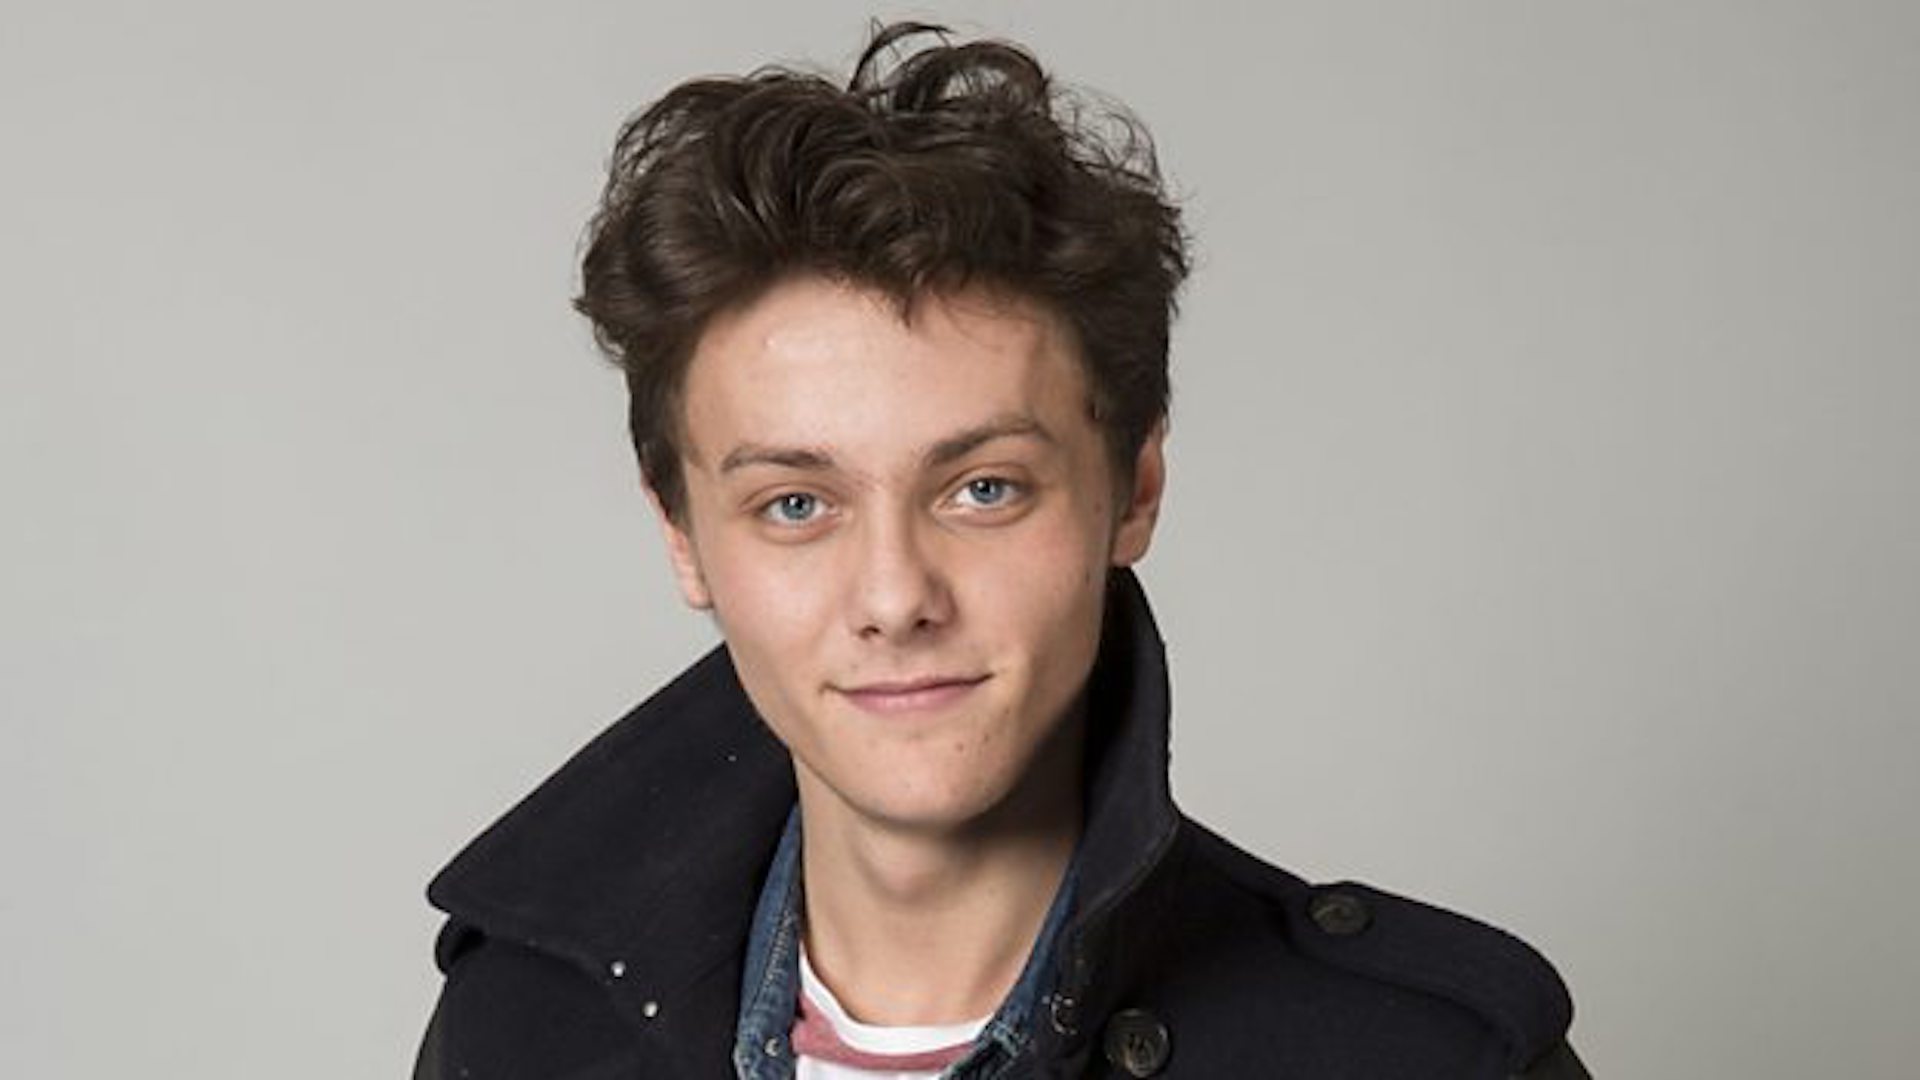 Outnumbered star working at American Golf - GolfPunkHQ